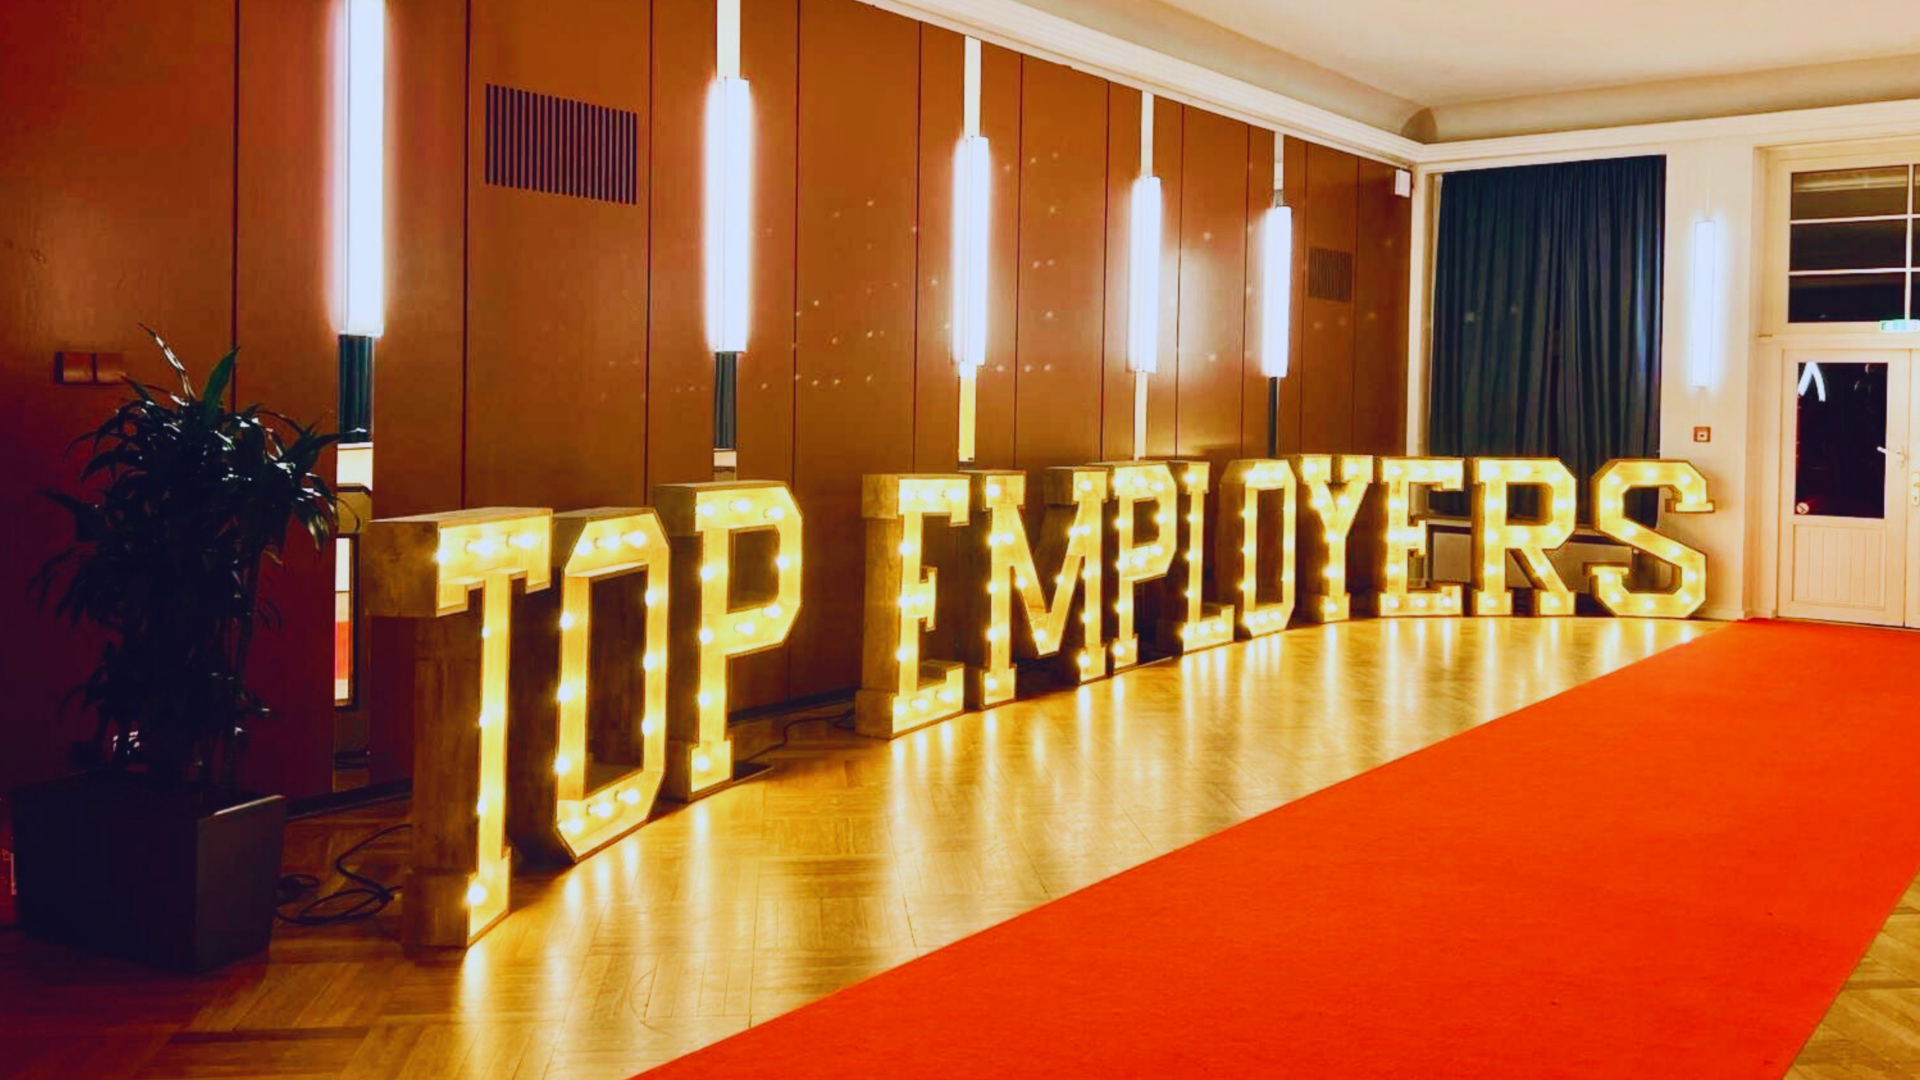 Gold and lots of color, in keeping with the motto "the art of being a top employer"